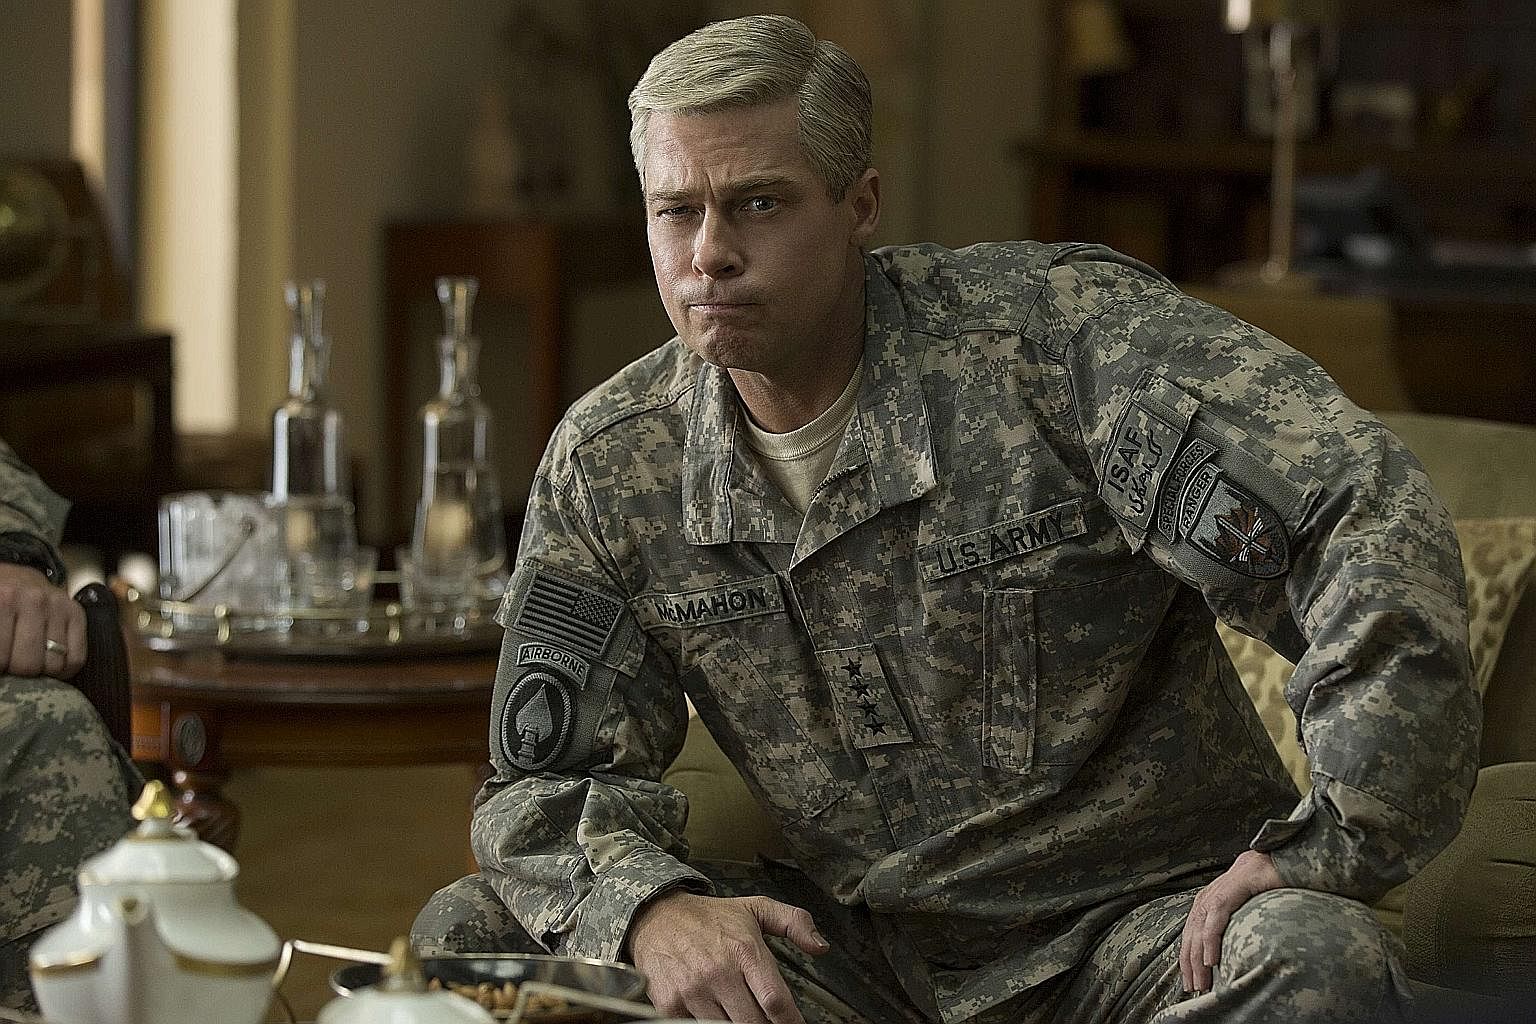 Dwayne Johnson and Zac Efron in the Baywatch reboot, and Brad Pitt (above) as a general in War Machine.